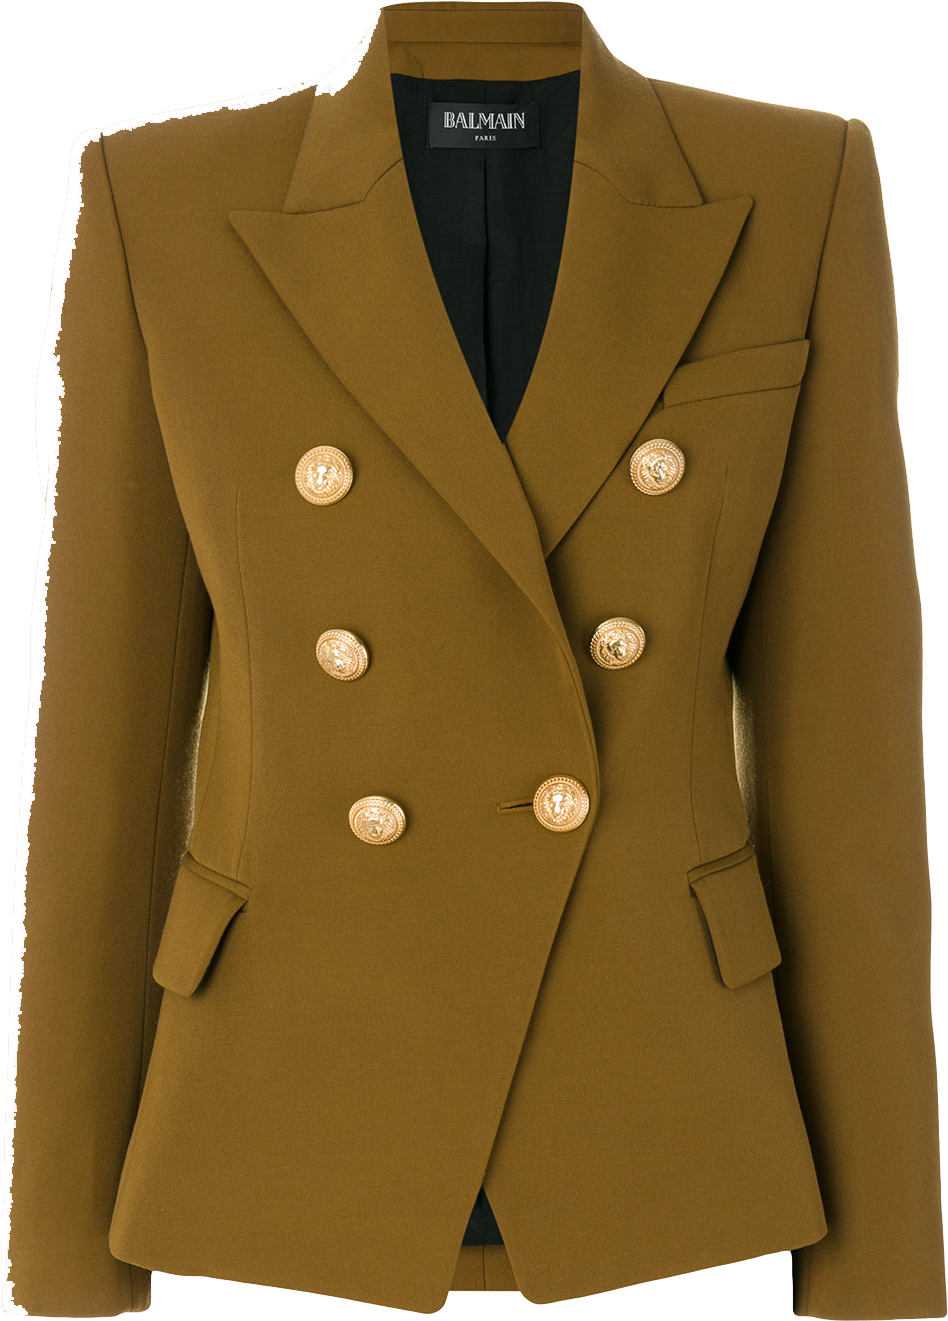 A Brown Jacket With Gold Buttons